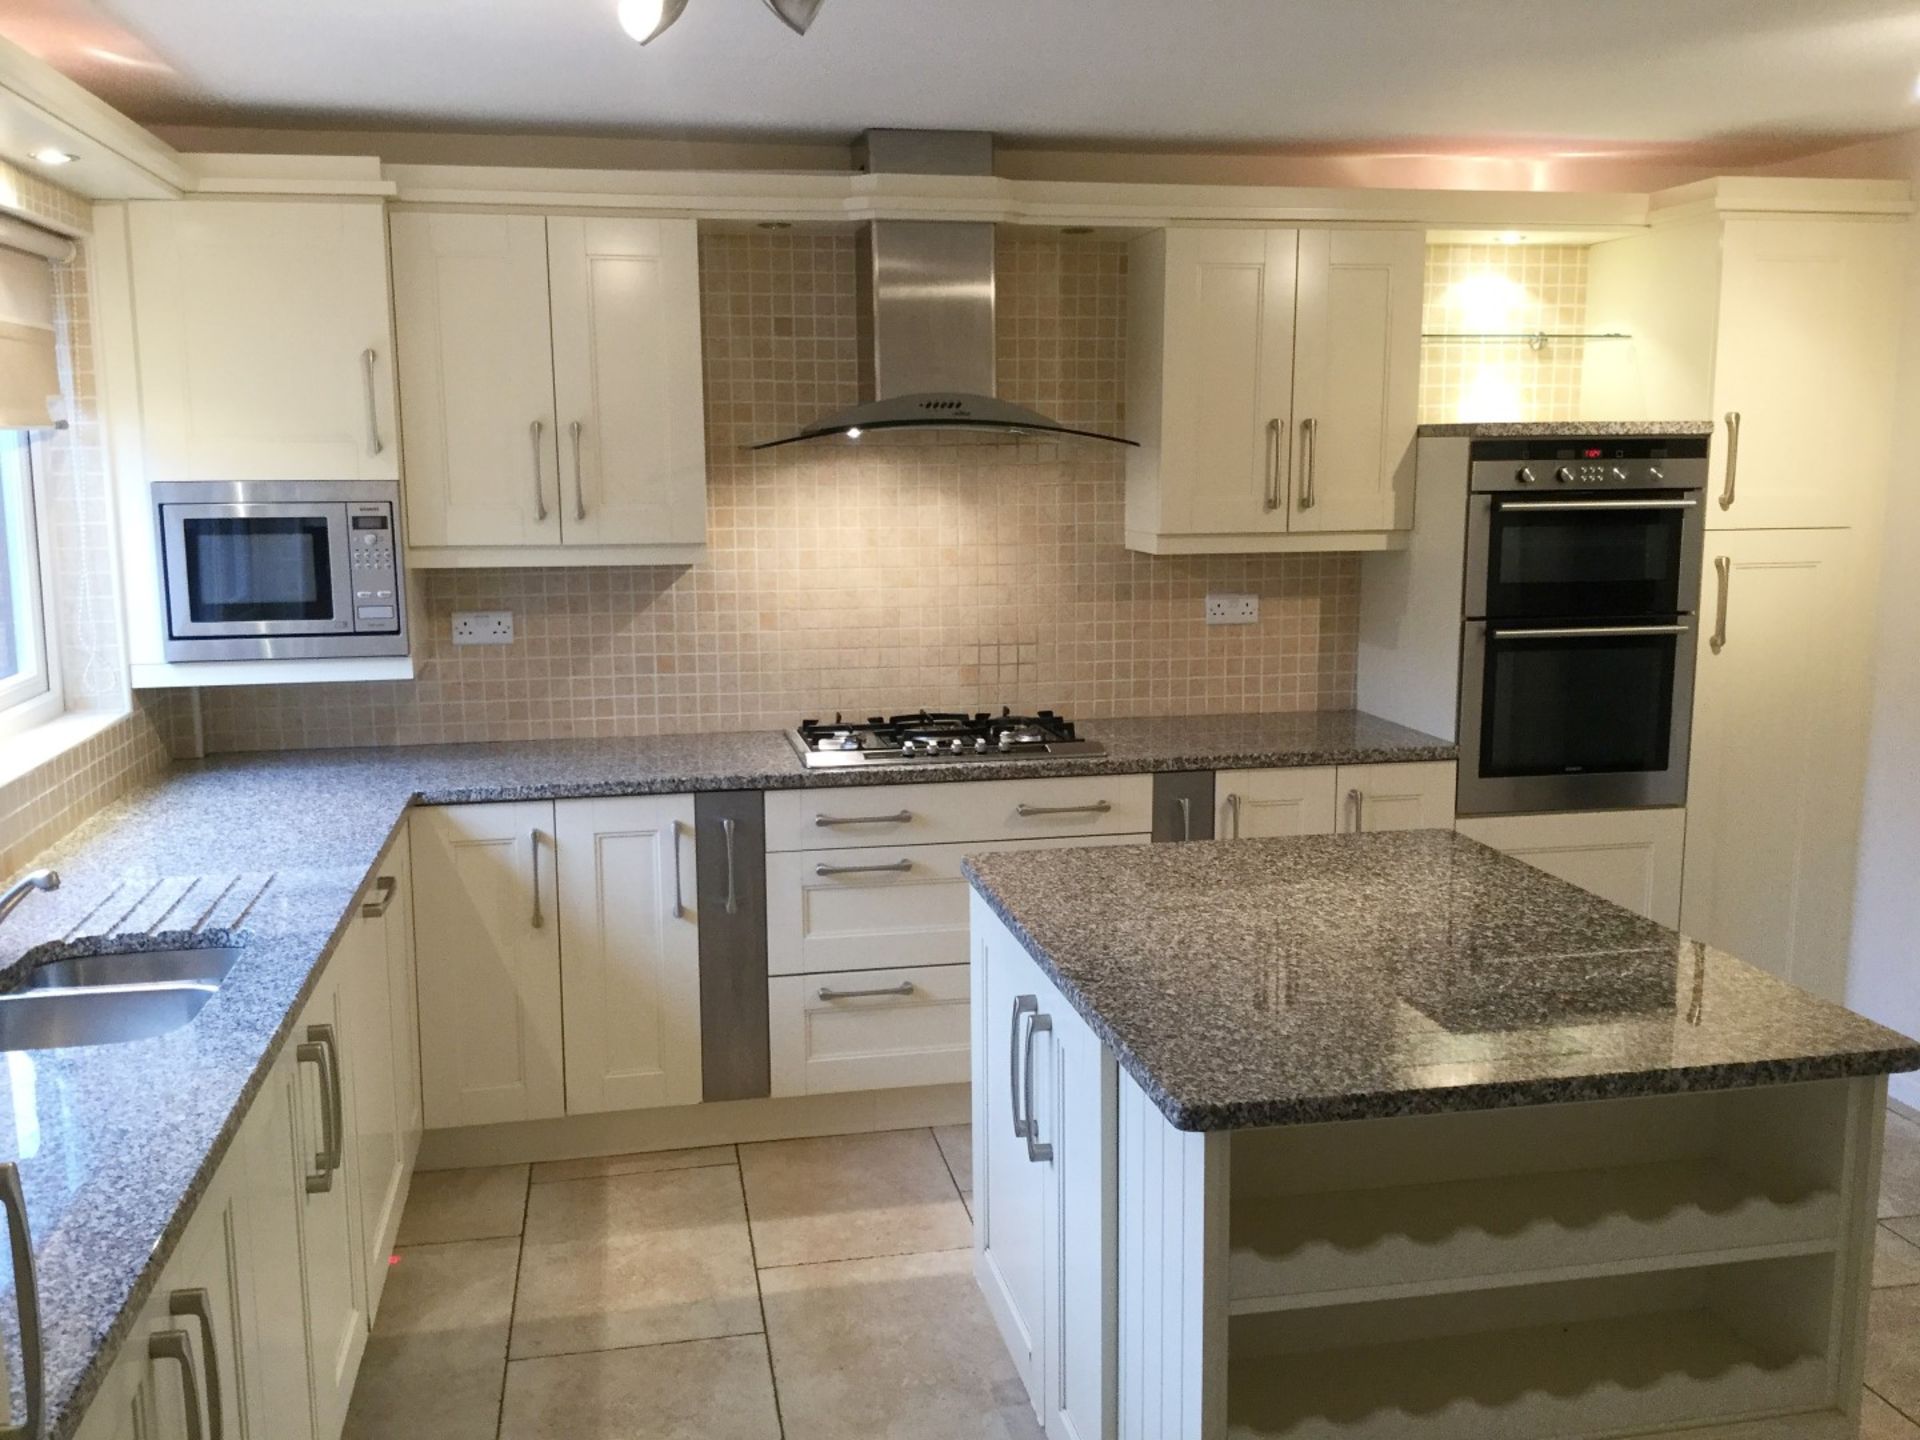 1 x Beautifully Crafted Bespoke Fitted Kitchen With Granite Worktops, Central Island, Utility